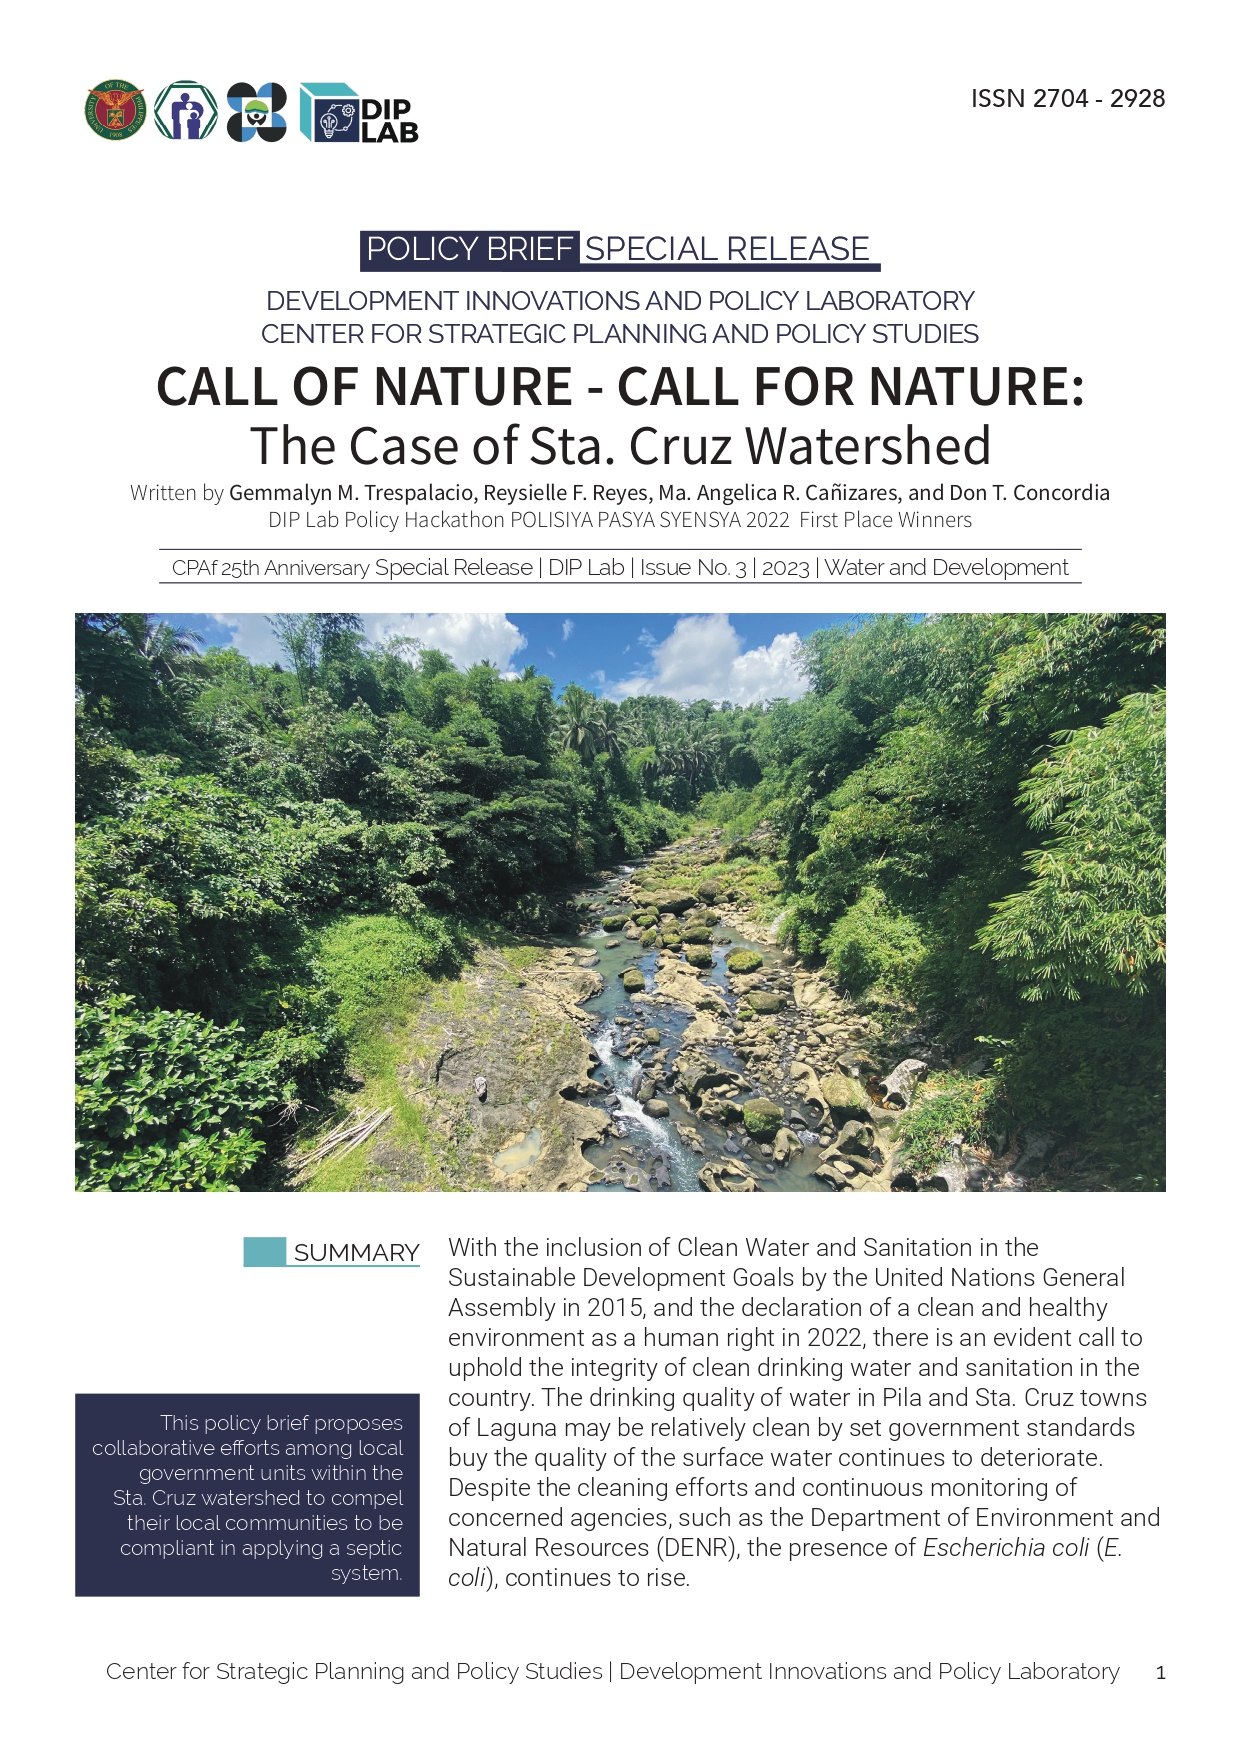 <strong>CALL OF NATURE - CALL FOR NATURE:<br>The Case of Sta. Cruz Watershed</strong>